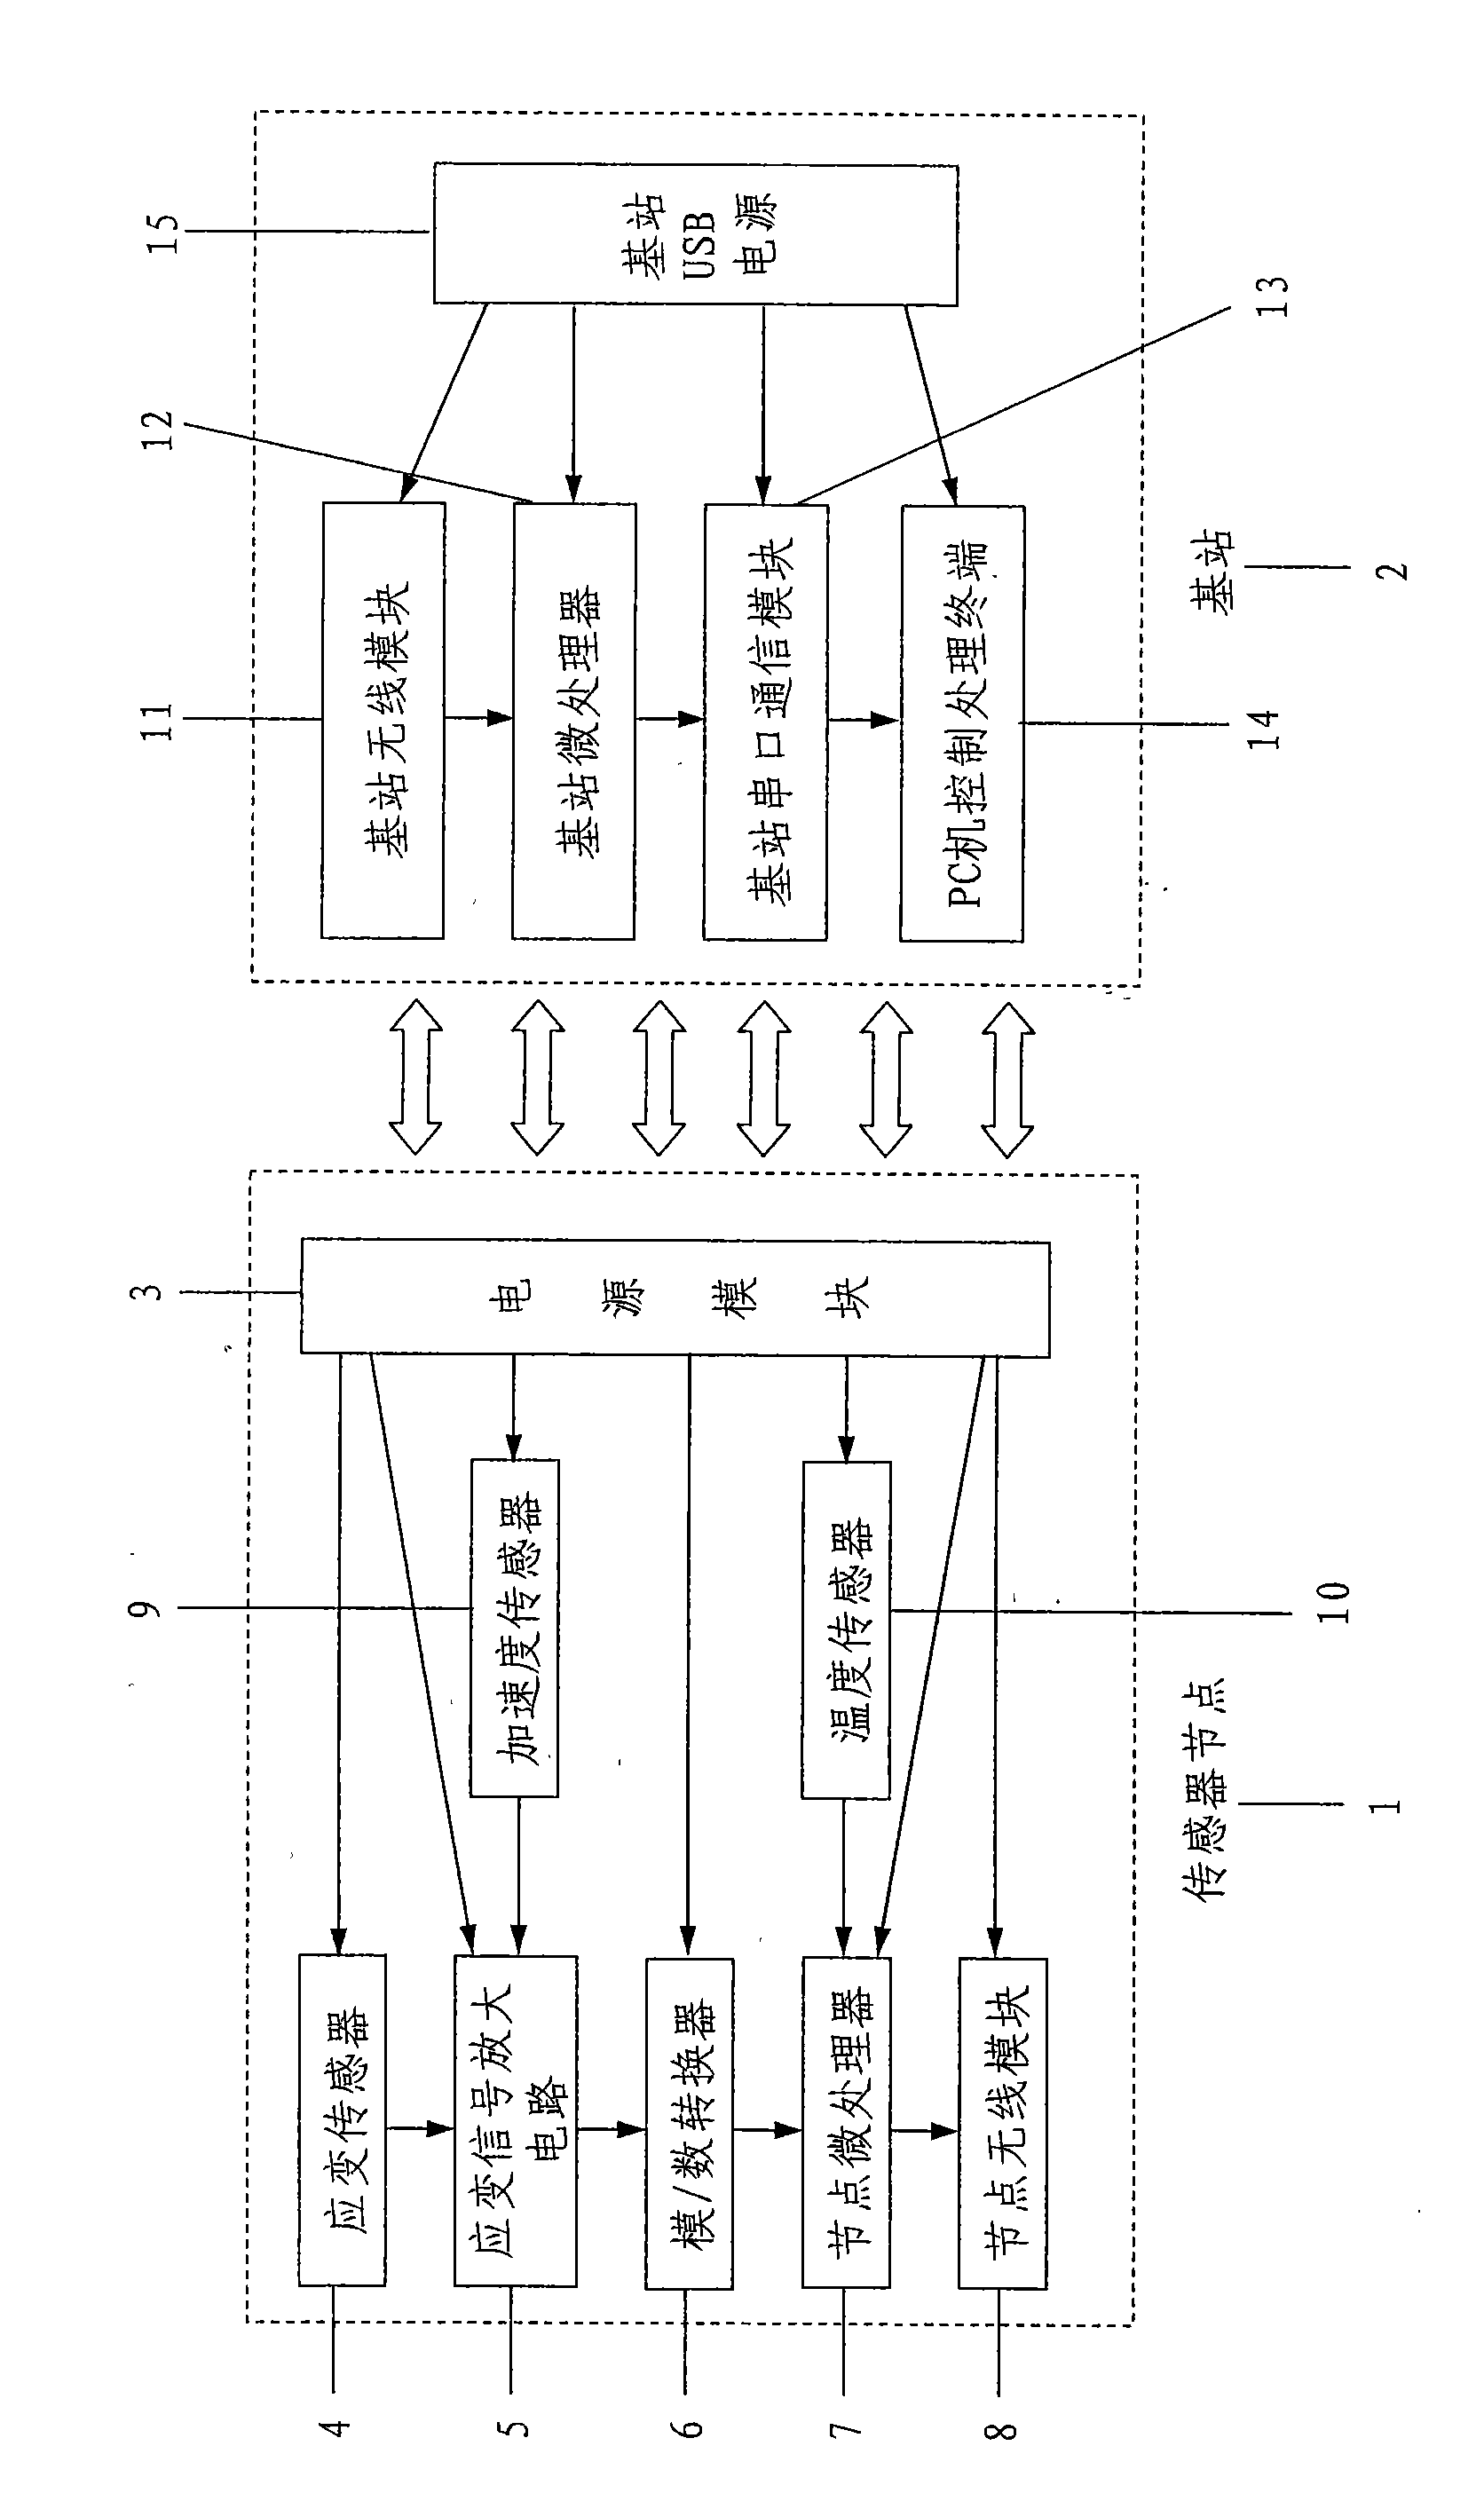 Radio acceleration strain temperature data collecting system based on solar energy